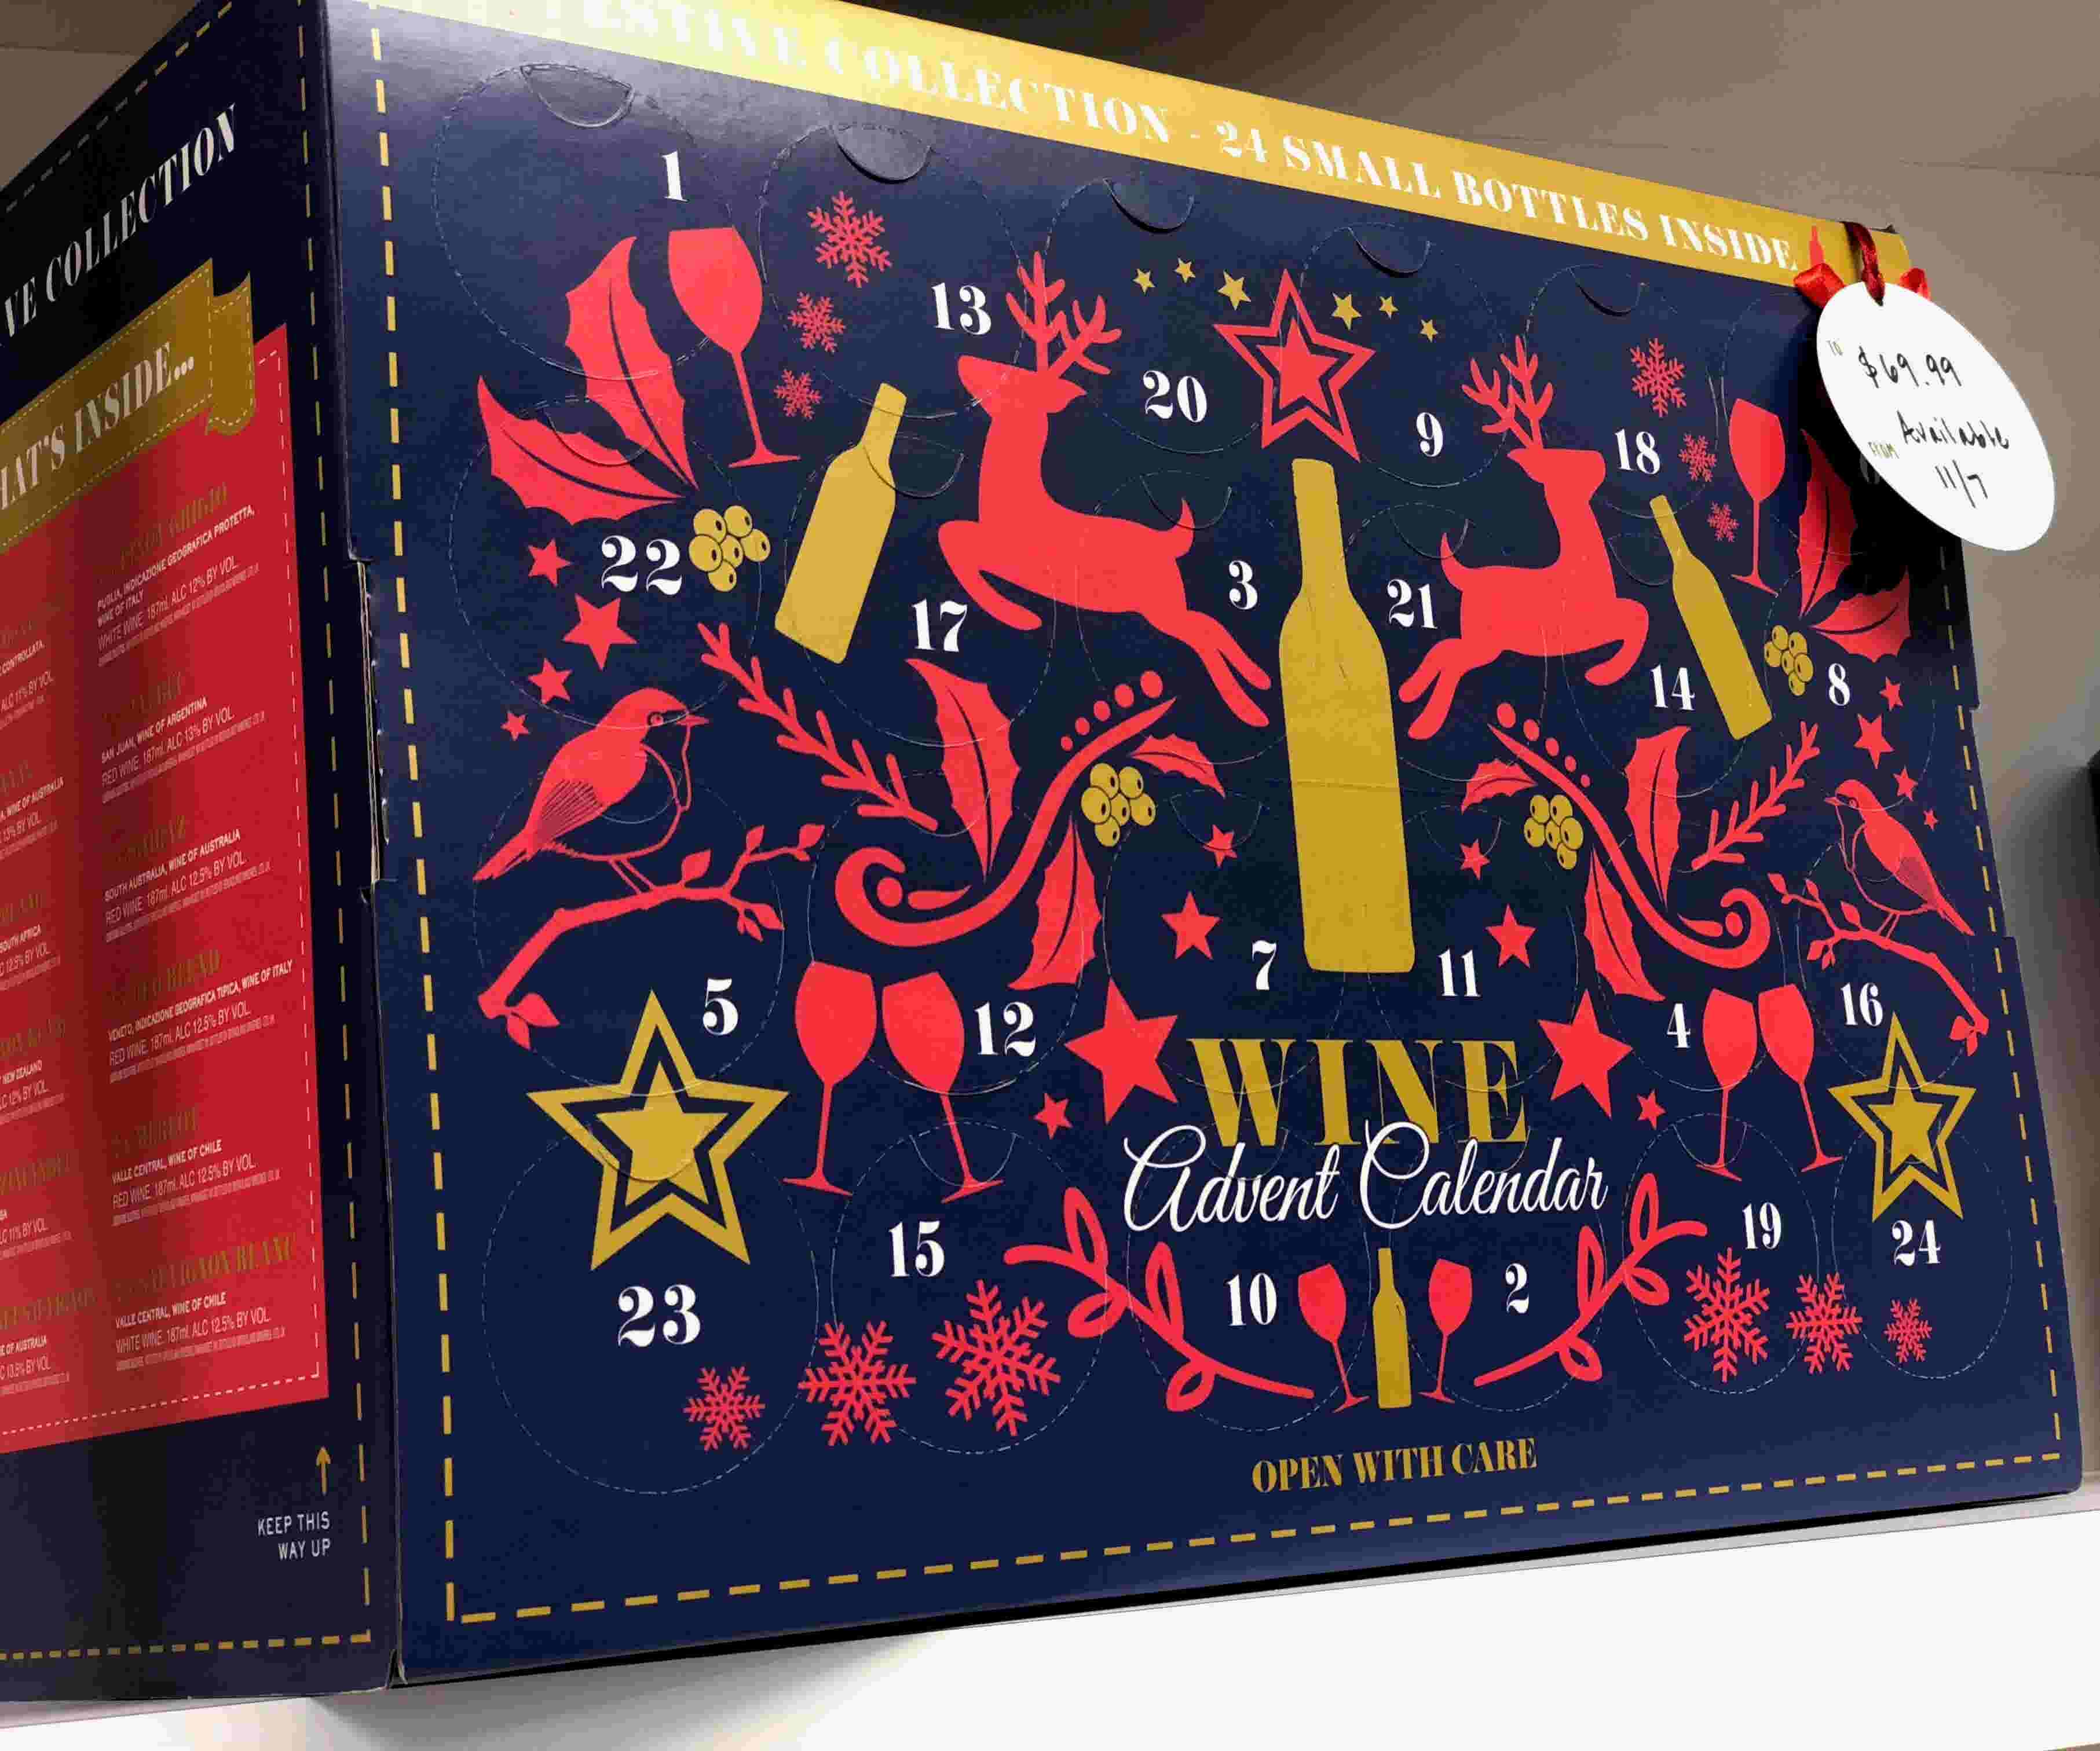 Aldi's wine and cheese Advent calendars are flying off the shelves